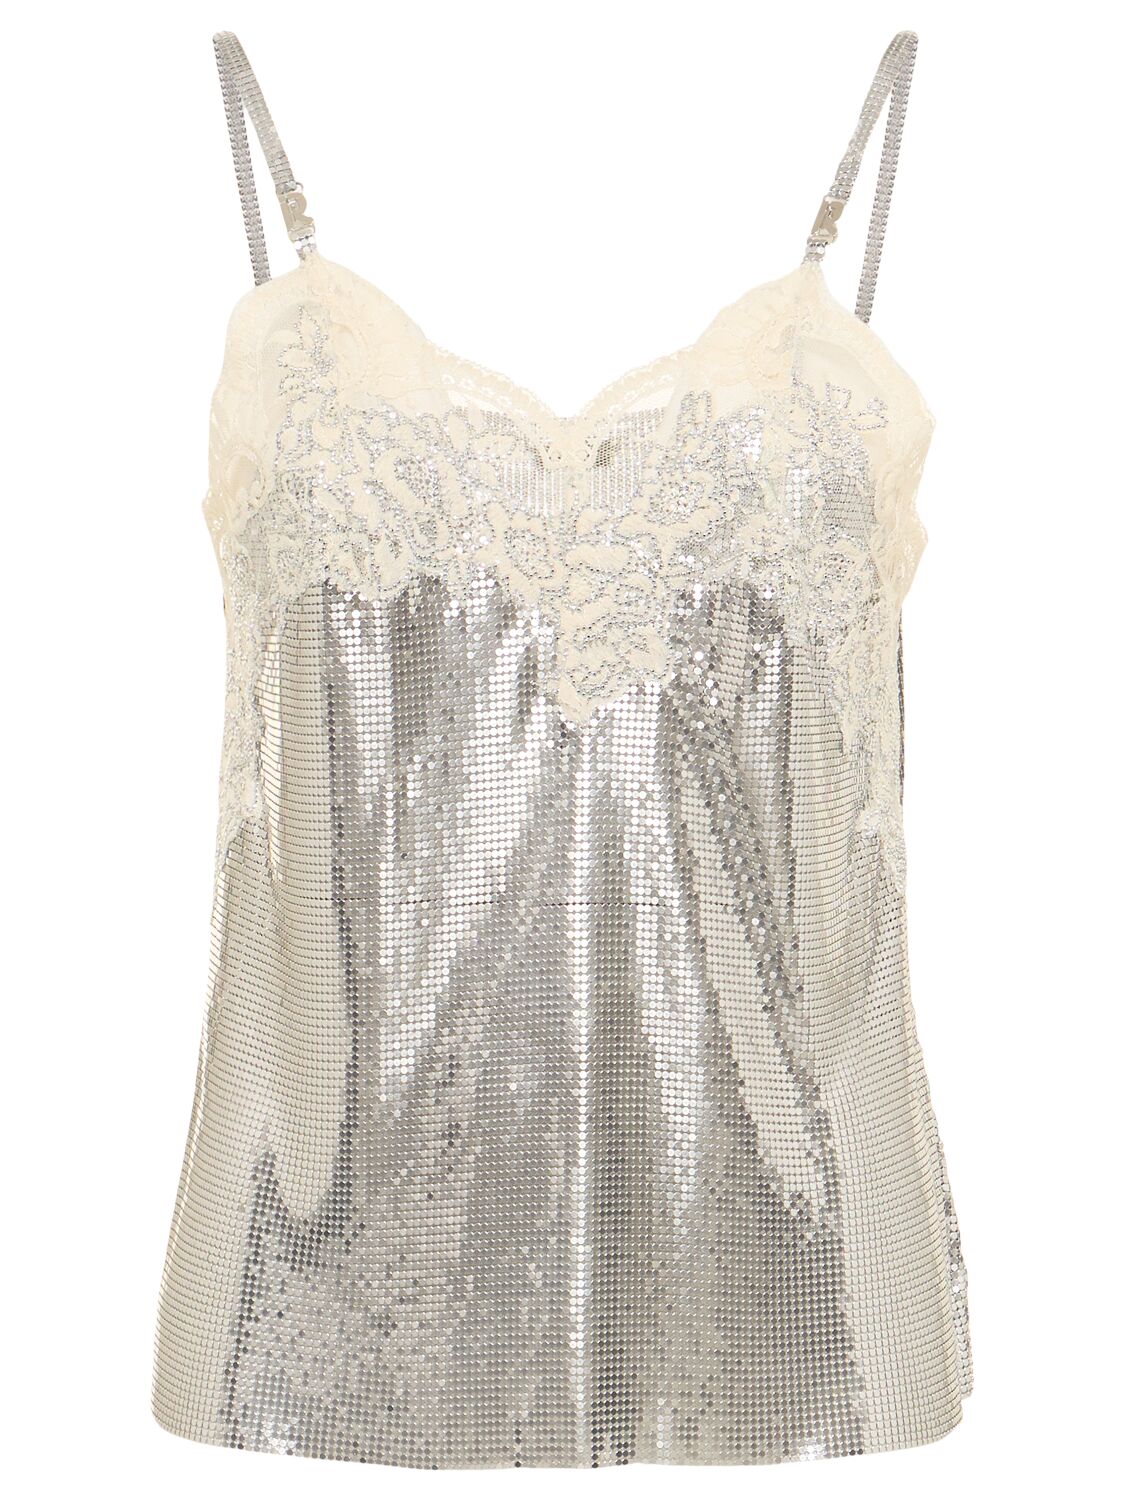 Image of Sequined Top W/ Lace